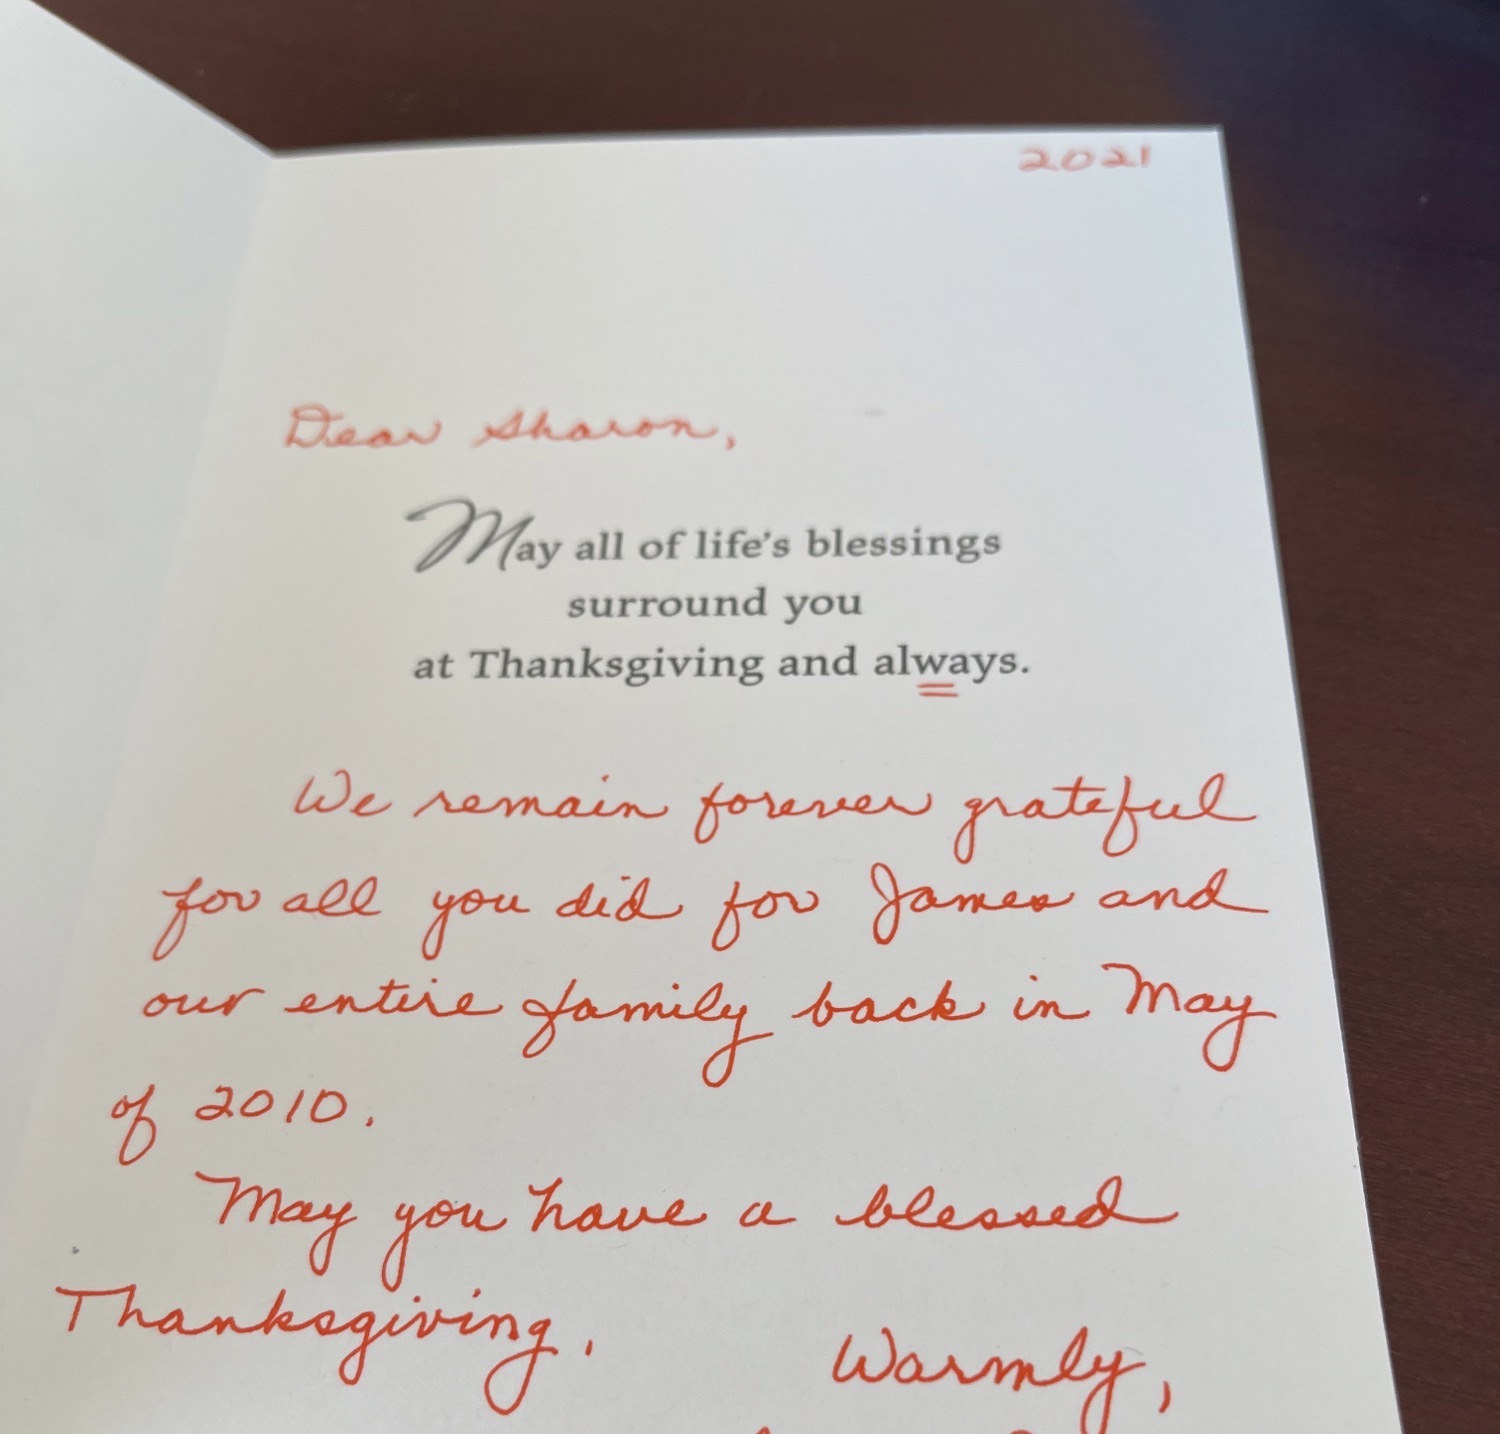 A Thanksgiving greeting card reads "Dear Sharon, We remain forever grateful for all you did for James and our entire family back in May of 2010. May you have a blessed Thanksgiving."